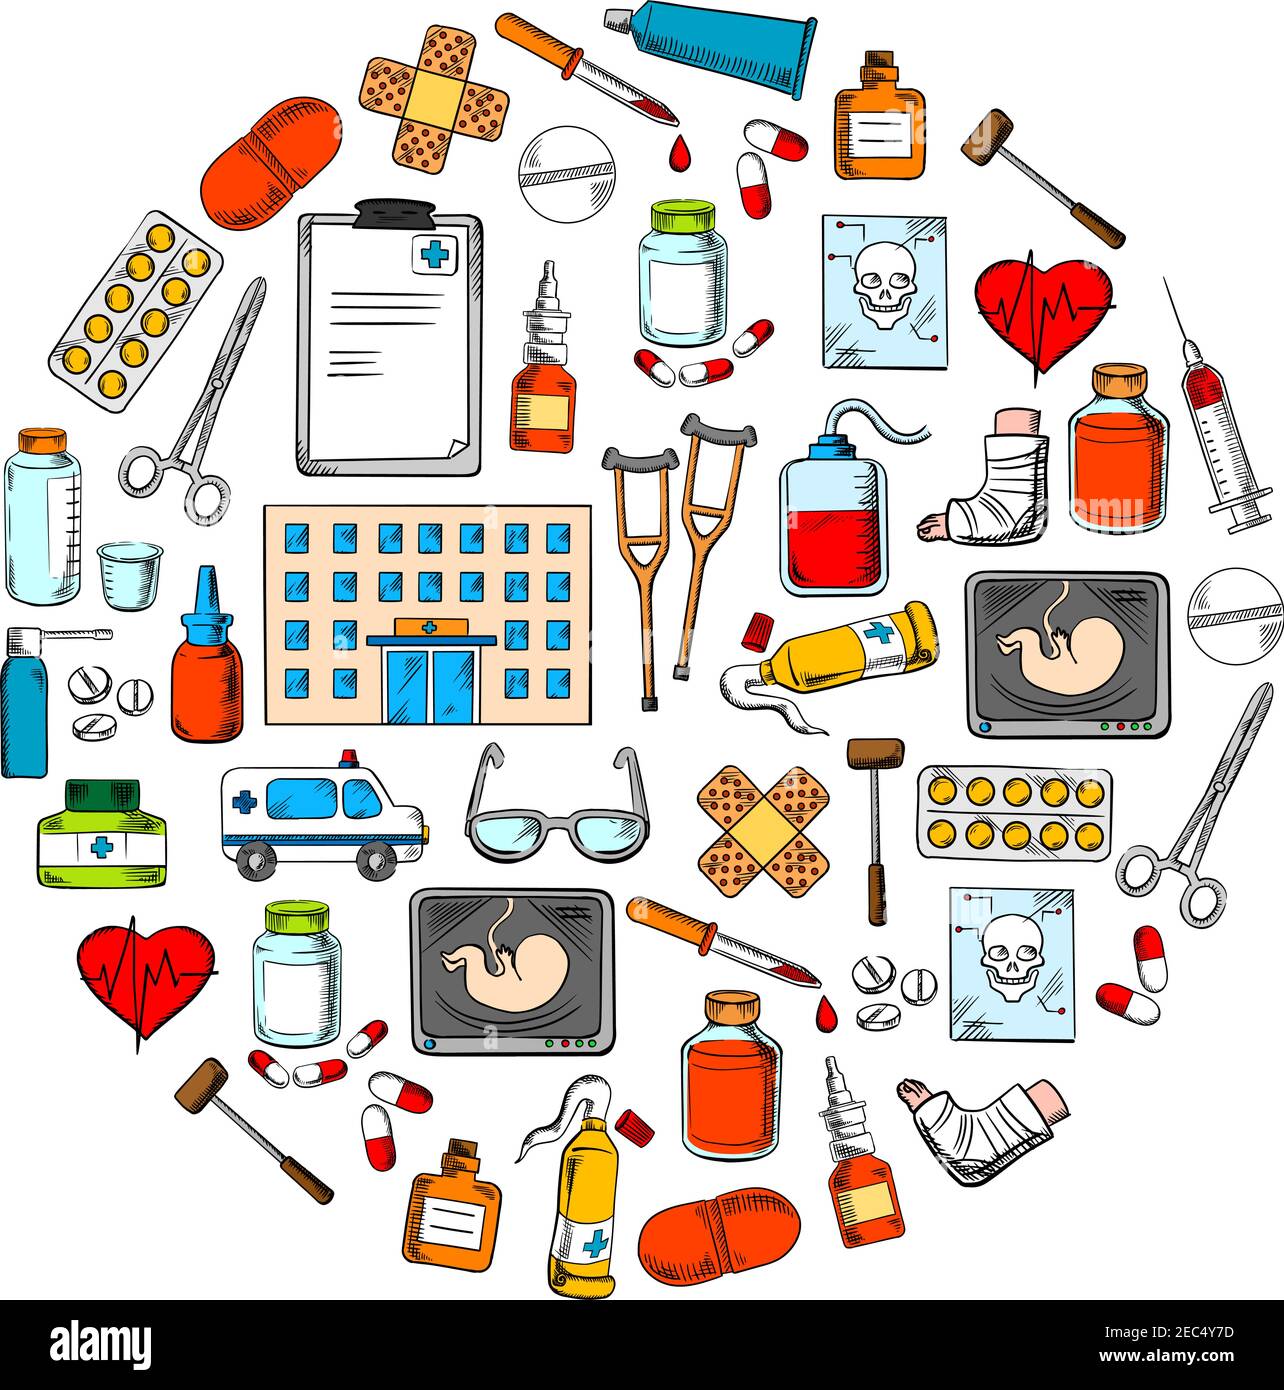 Medical and hospital services round symbol with sketch icons of clinic, ambulance, hearts, pills, syringes, medication bottles, blood bag, skull x-ray Stock Vector